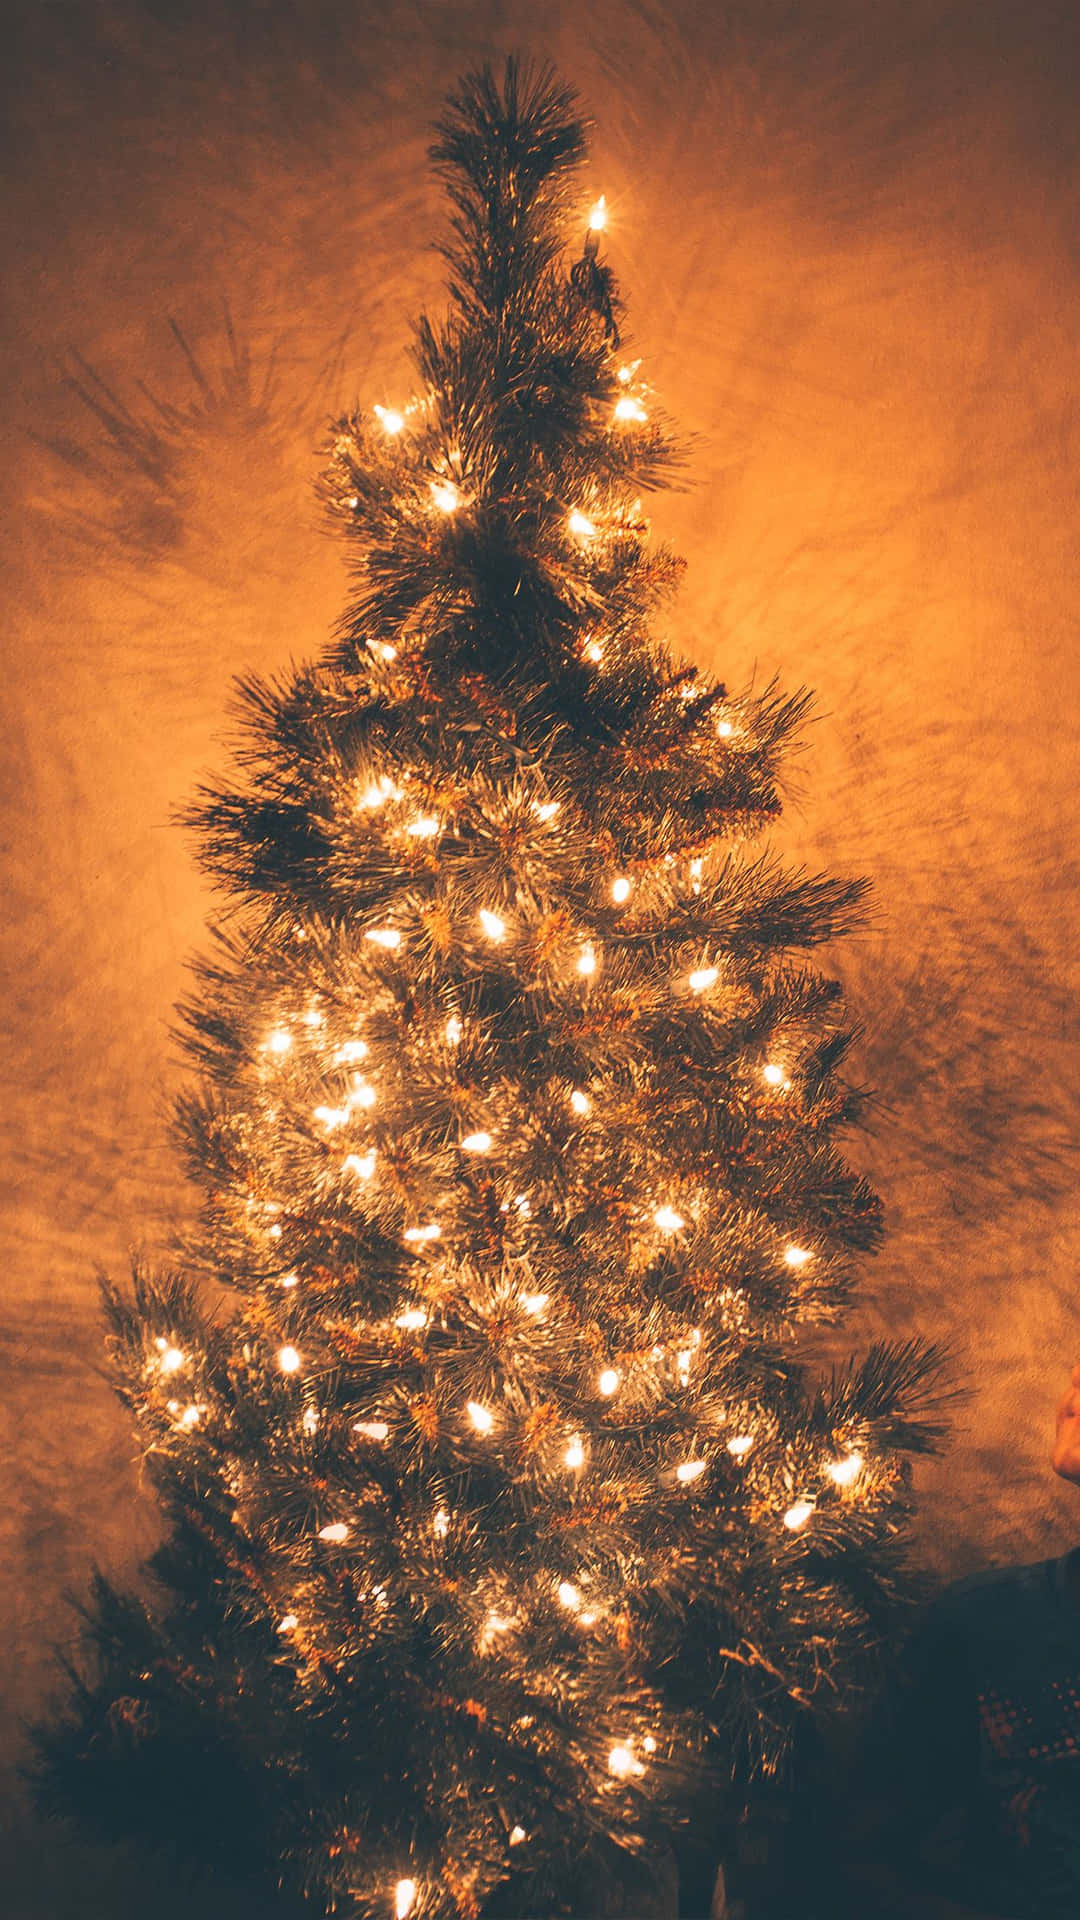 A Christmas Tree With Lights In The Background Wallpaper